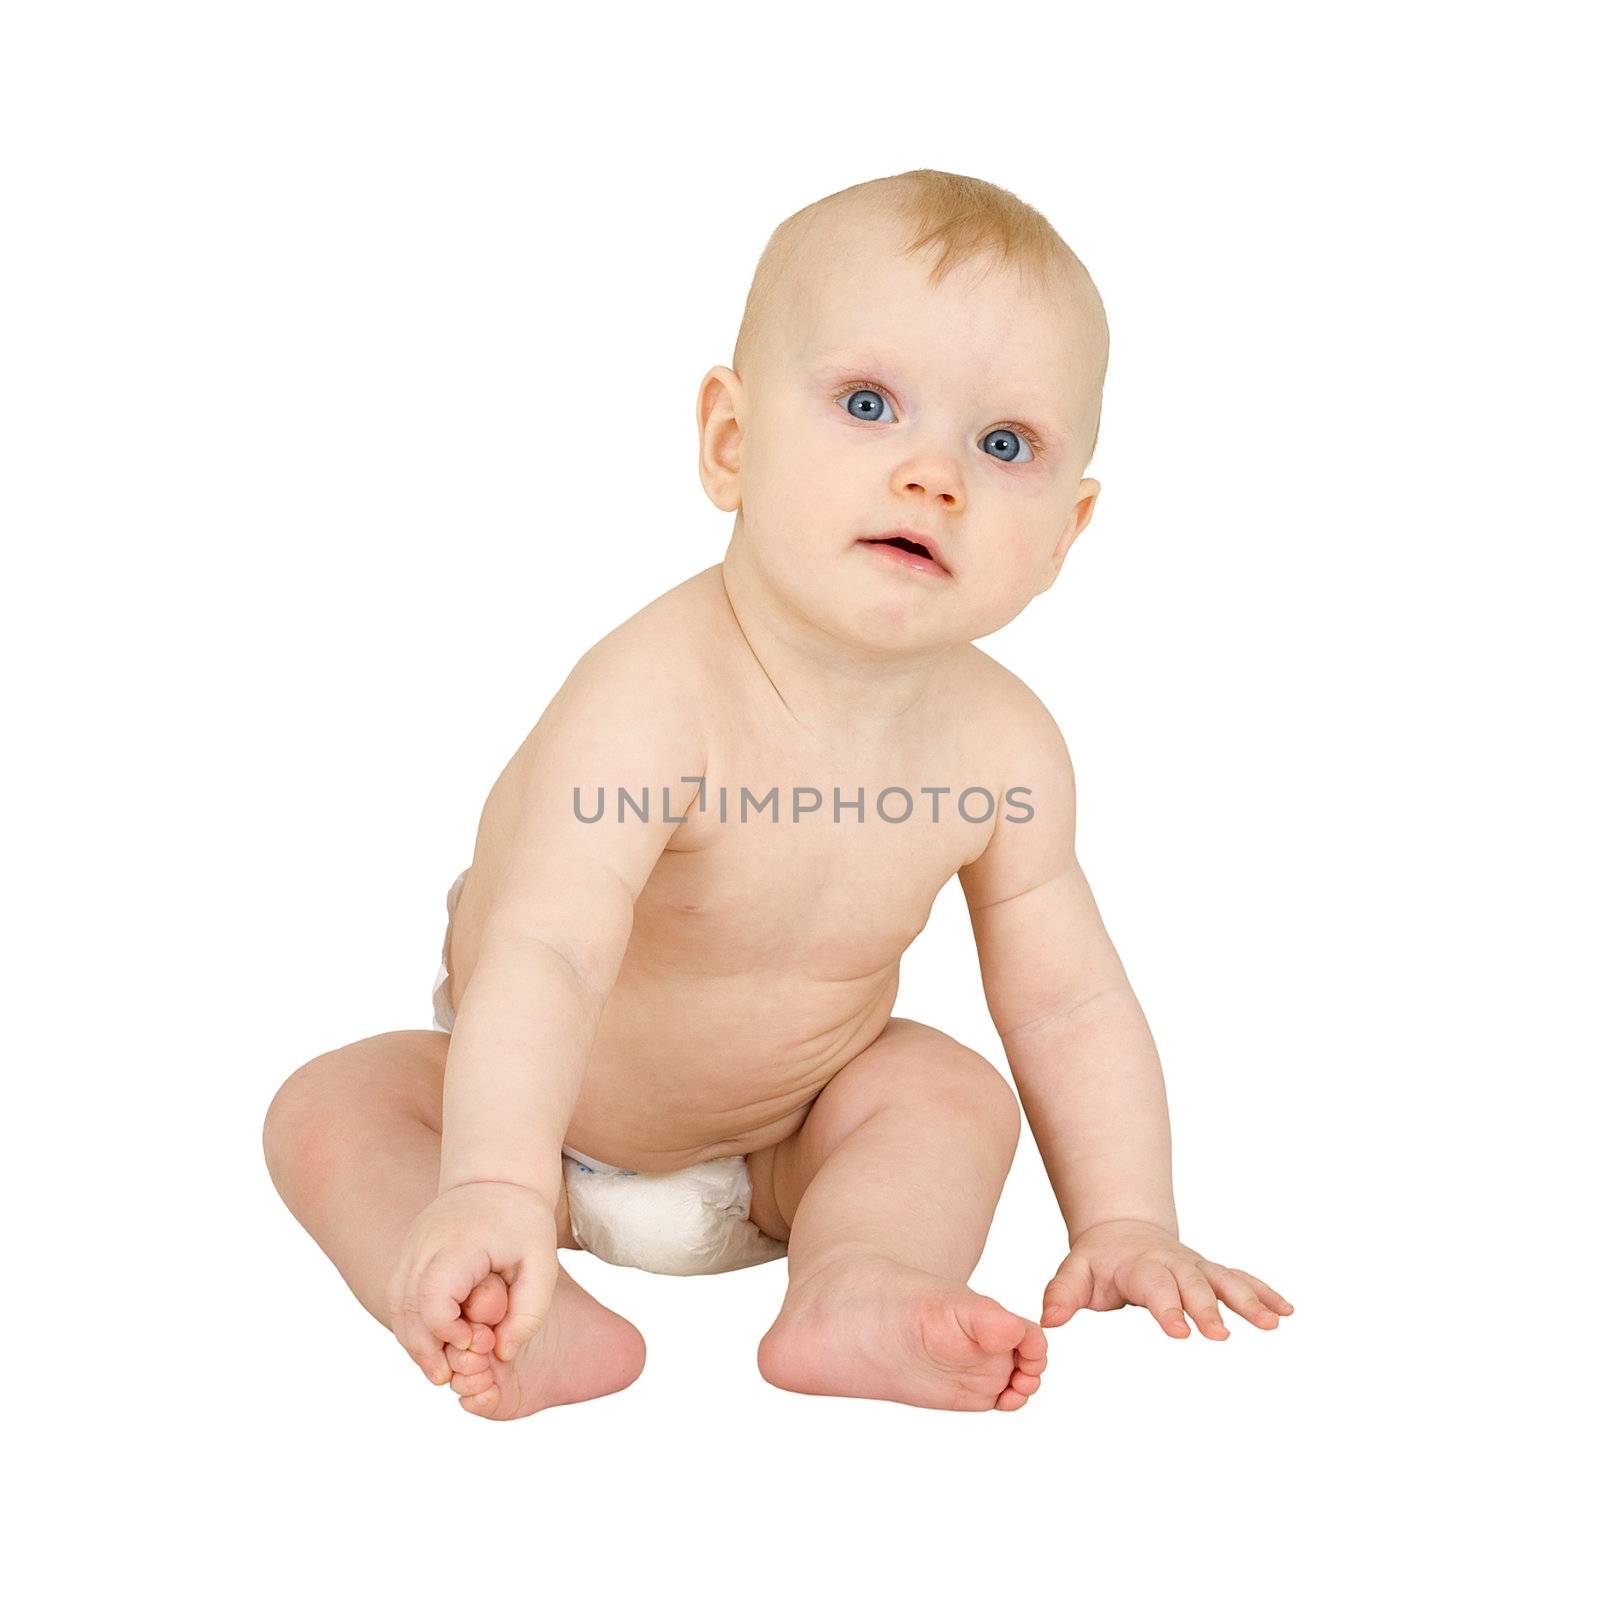 Infant to sit in nappy on the white background